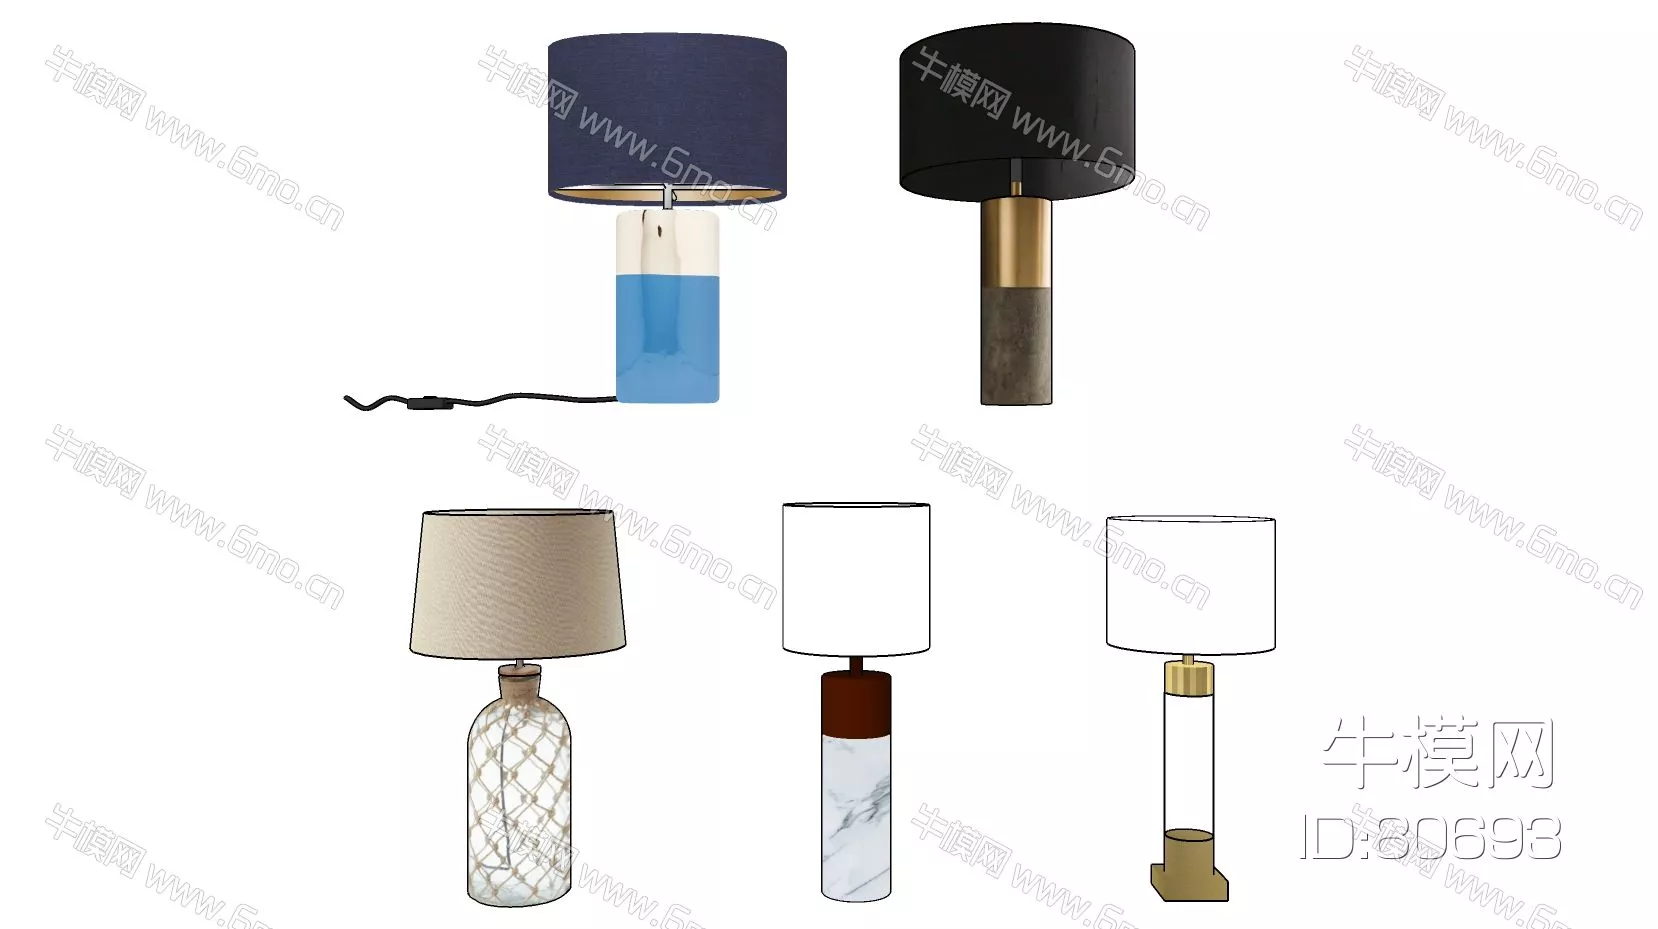 CHINESE TABLE LAMP - SKETCHUP 3D MODEL - ENSCAPE - 80693